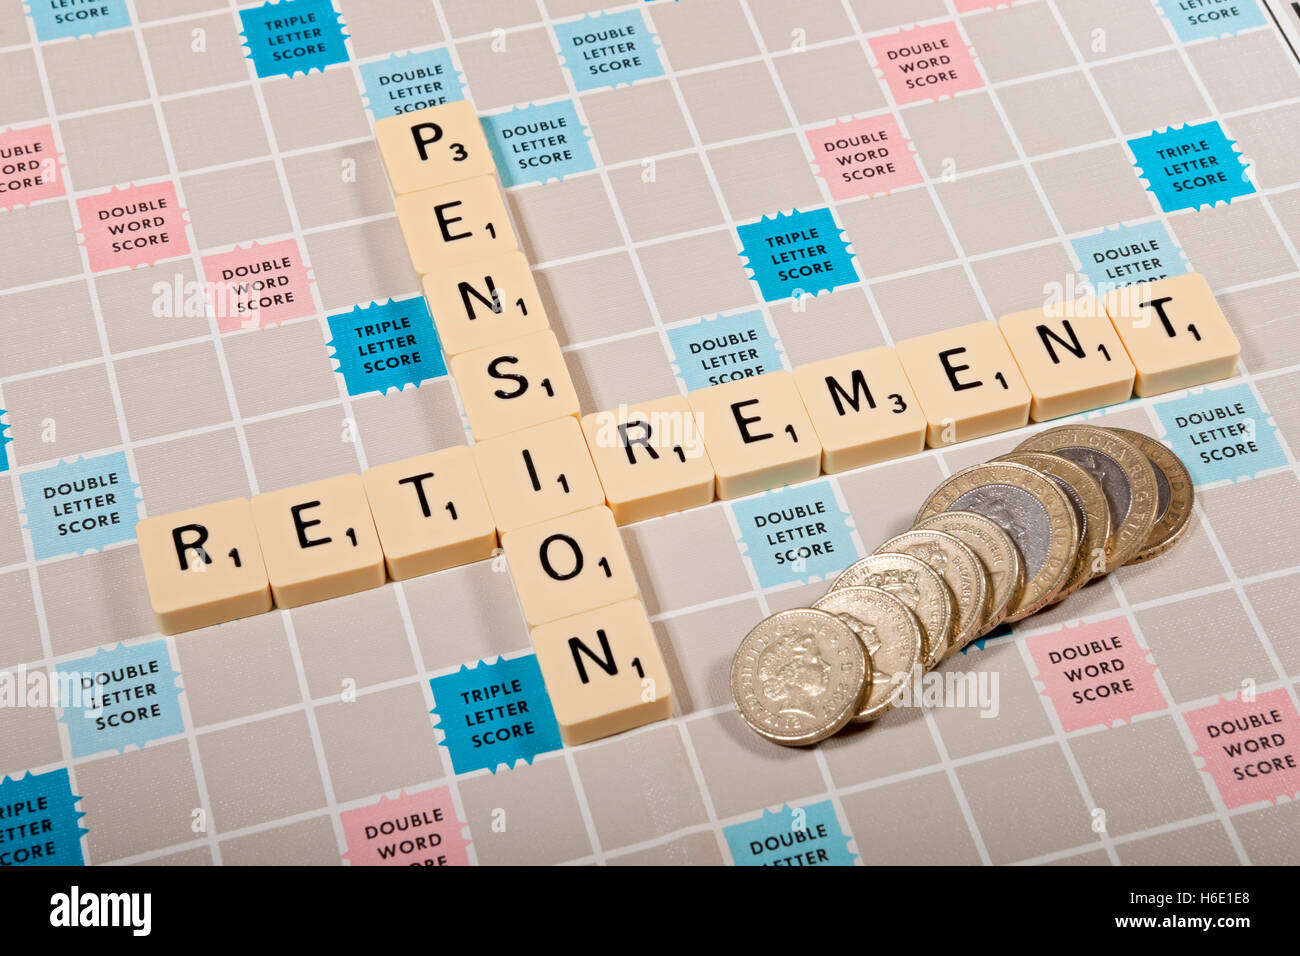 Scrabble board and tiles personal finance pension pensions retirement concept England UK United Kingdom GB Great Britain Stock Photo